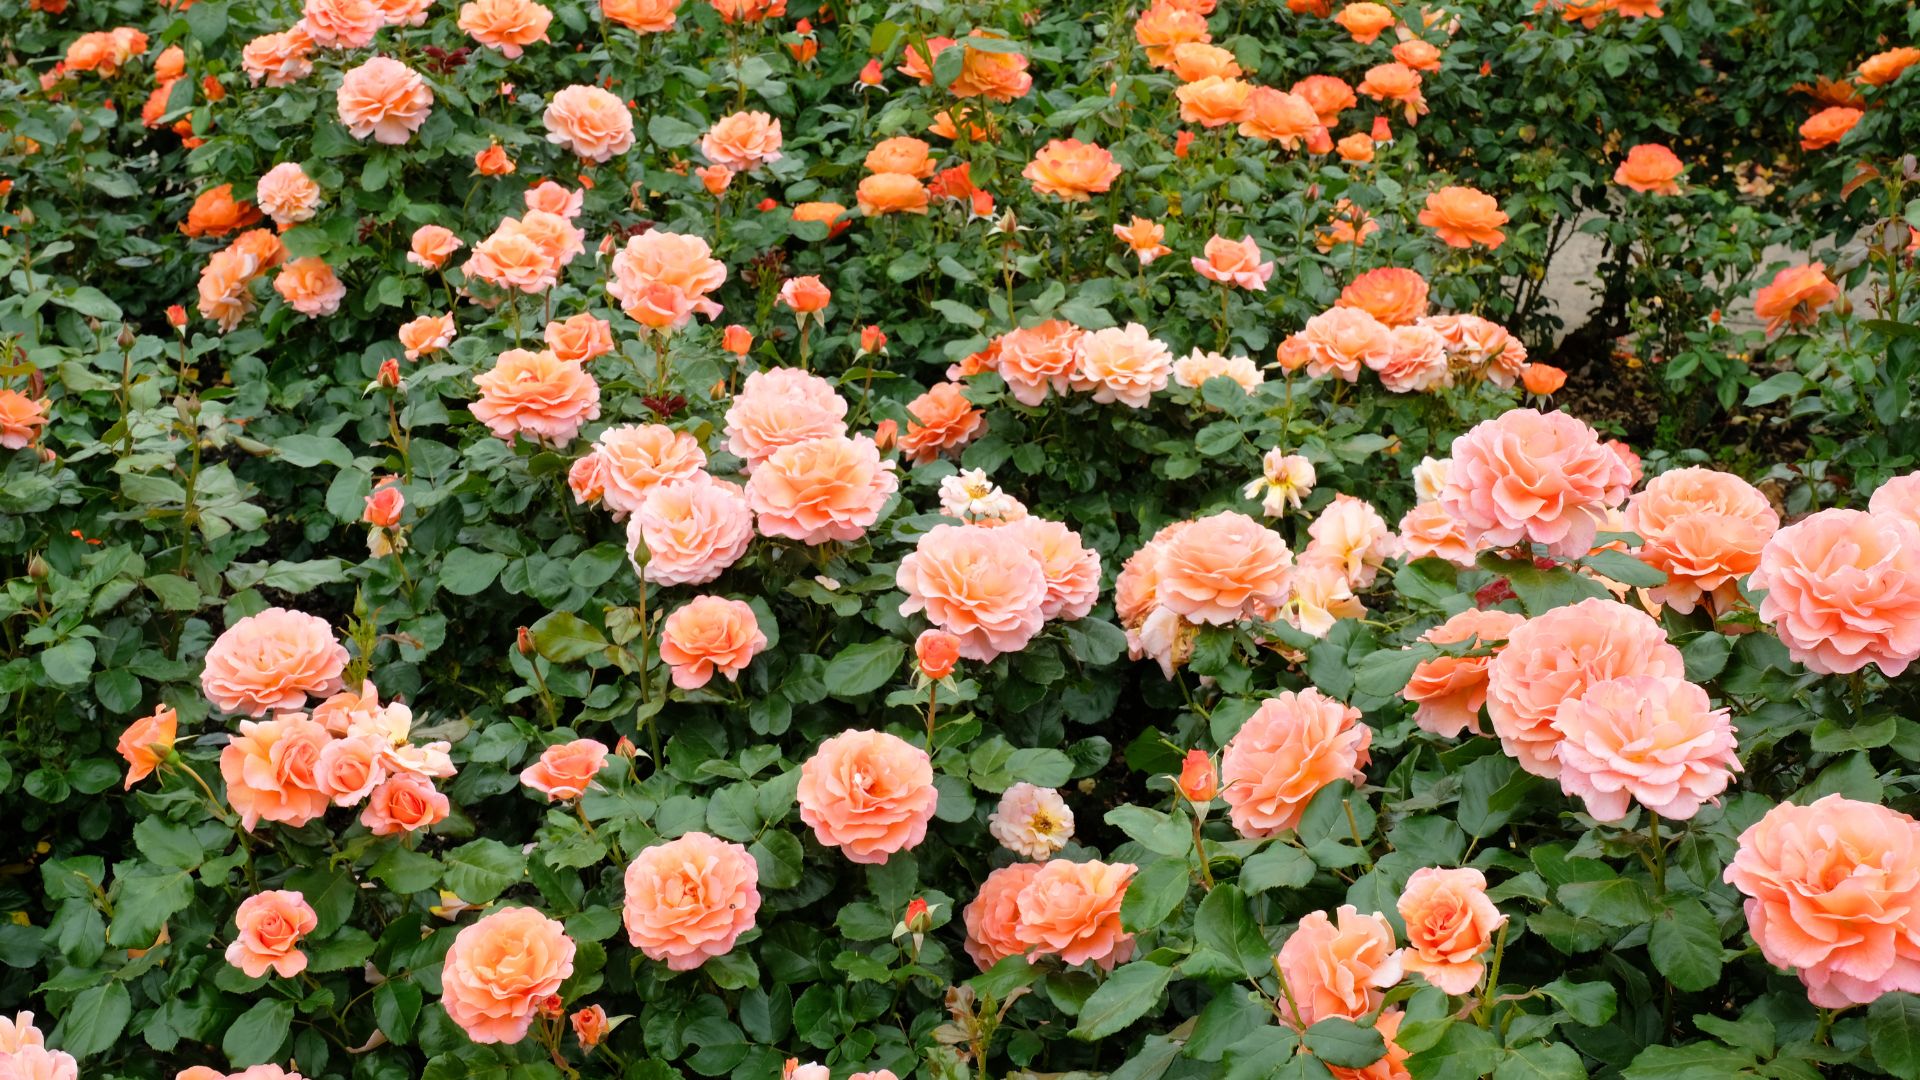 Photo of peach colored roses.